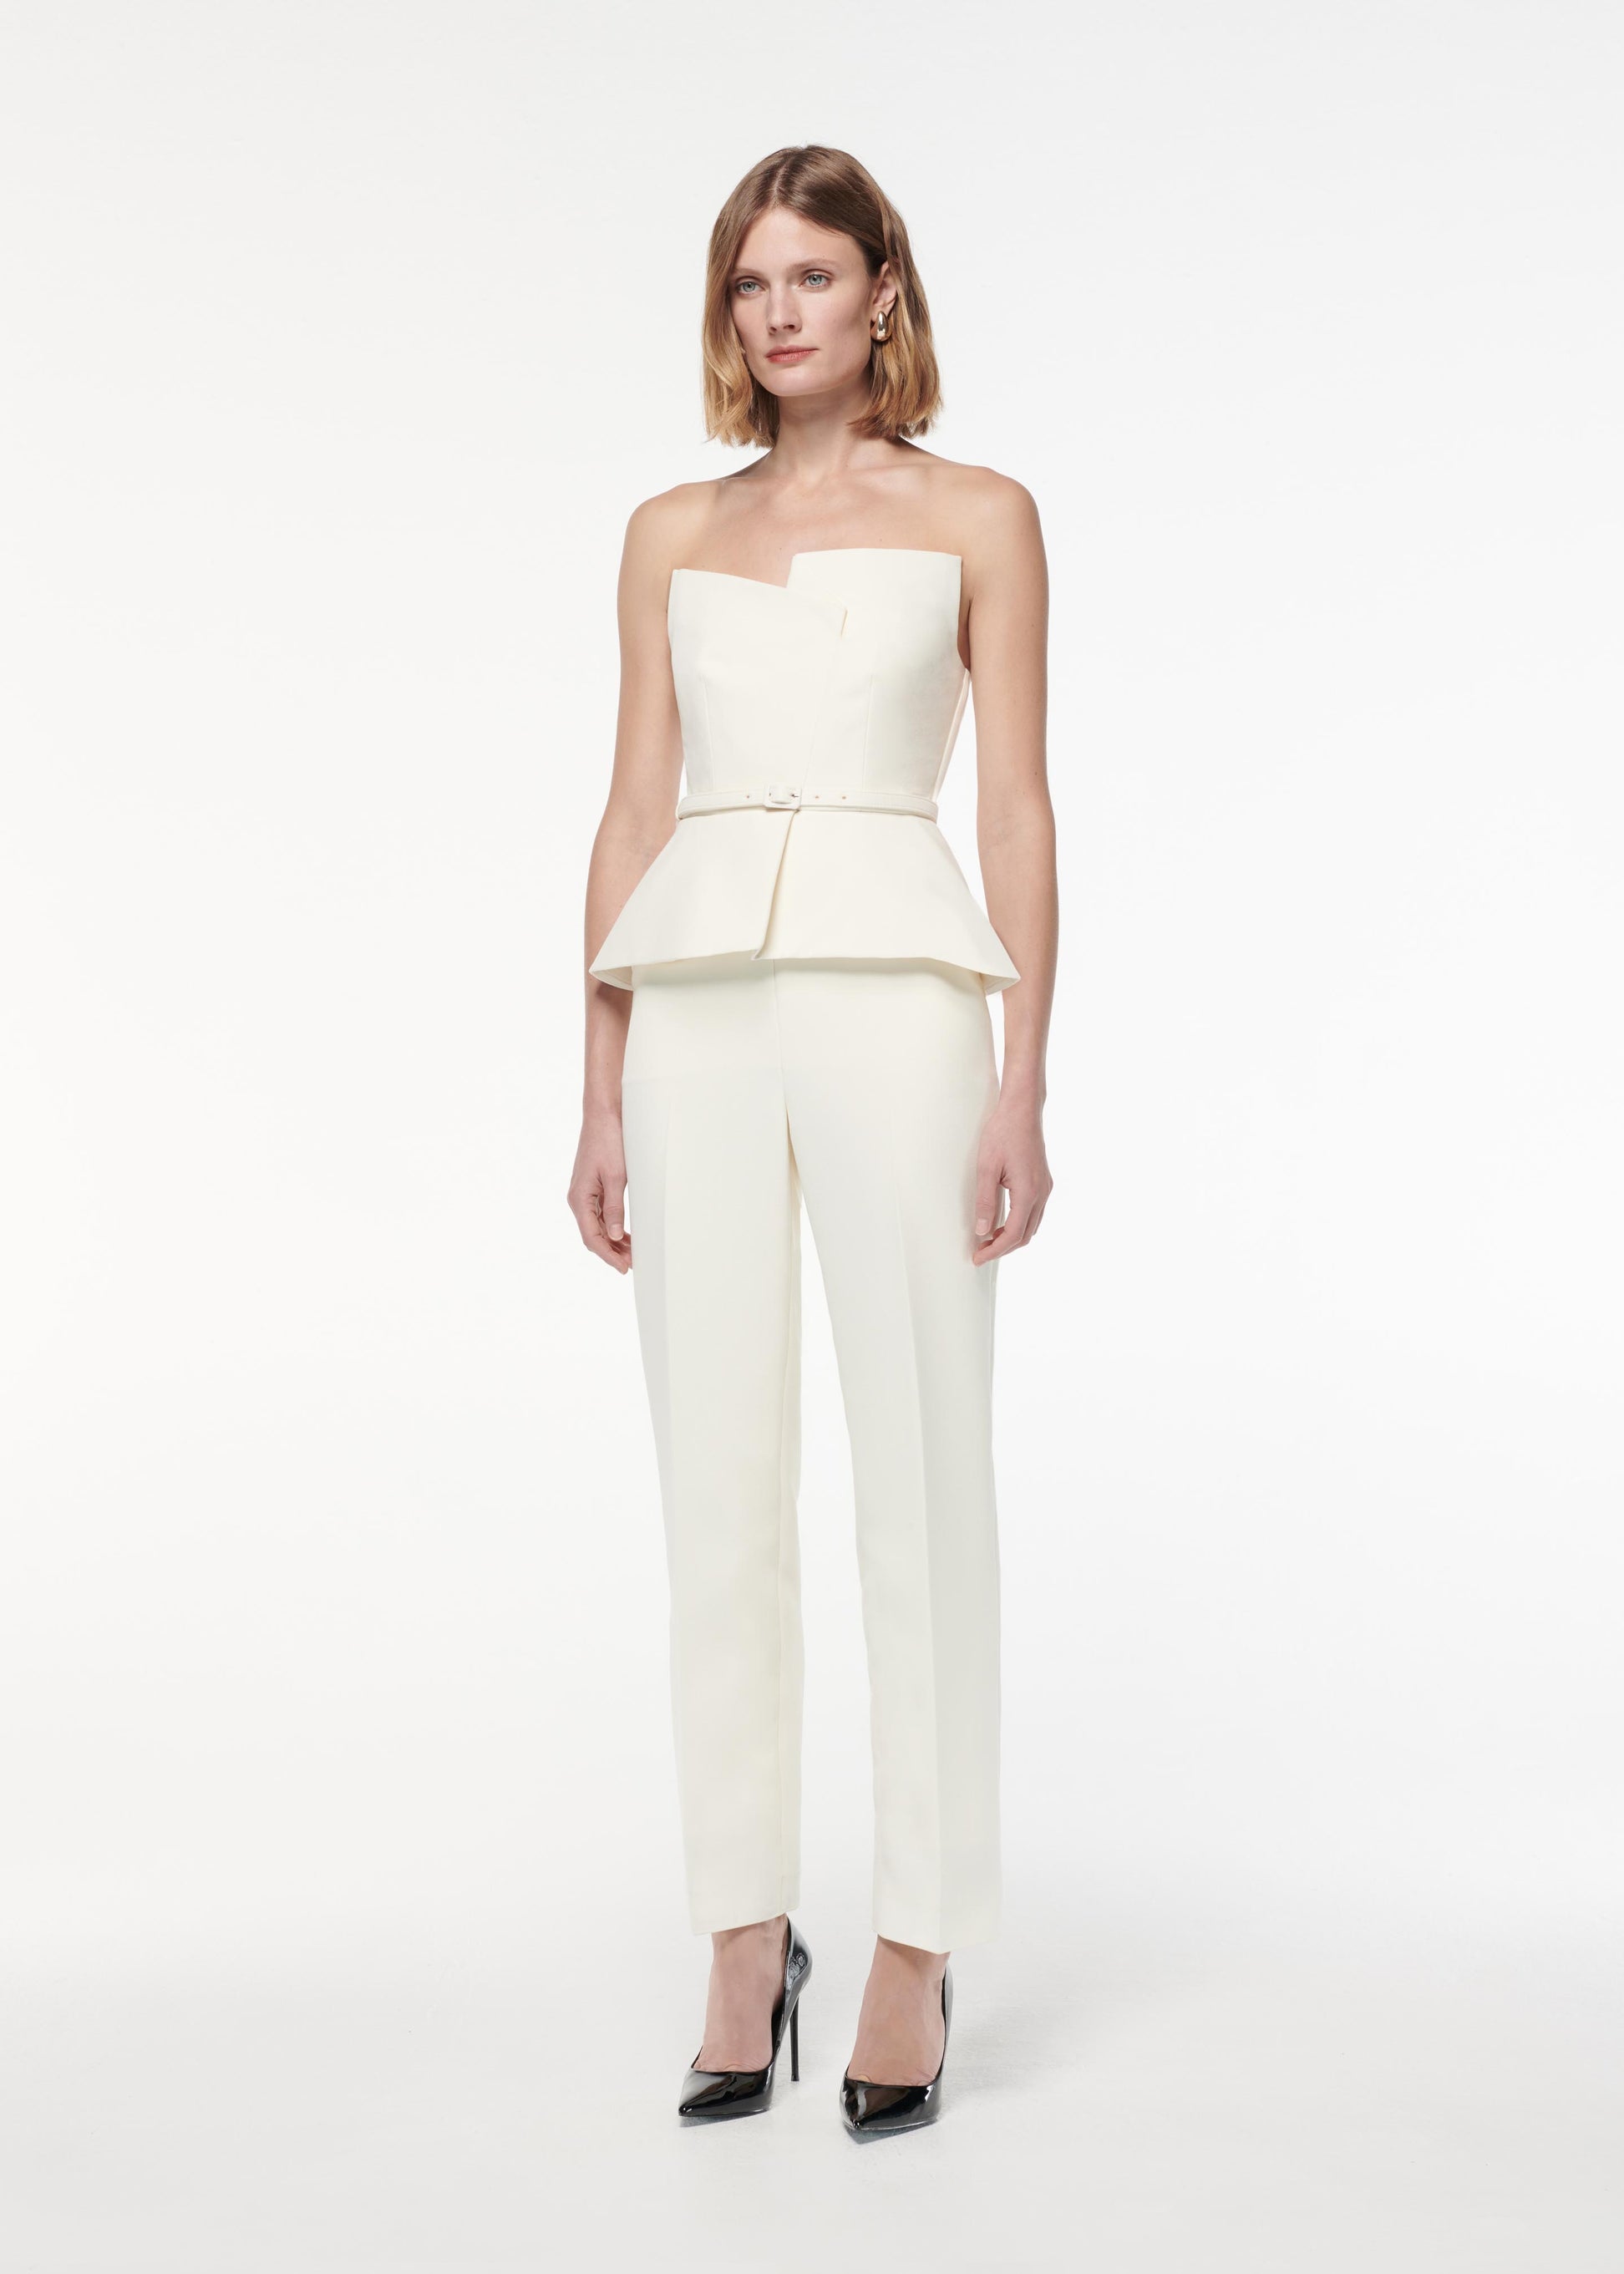 A photograph of a woman wearing a Strapless Peplum Crepe Jumpsuit in Cream